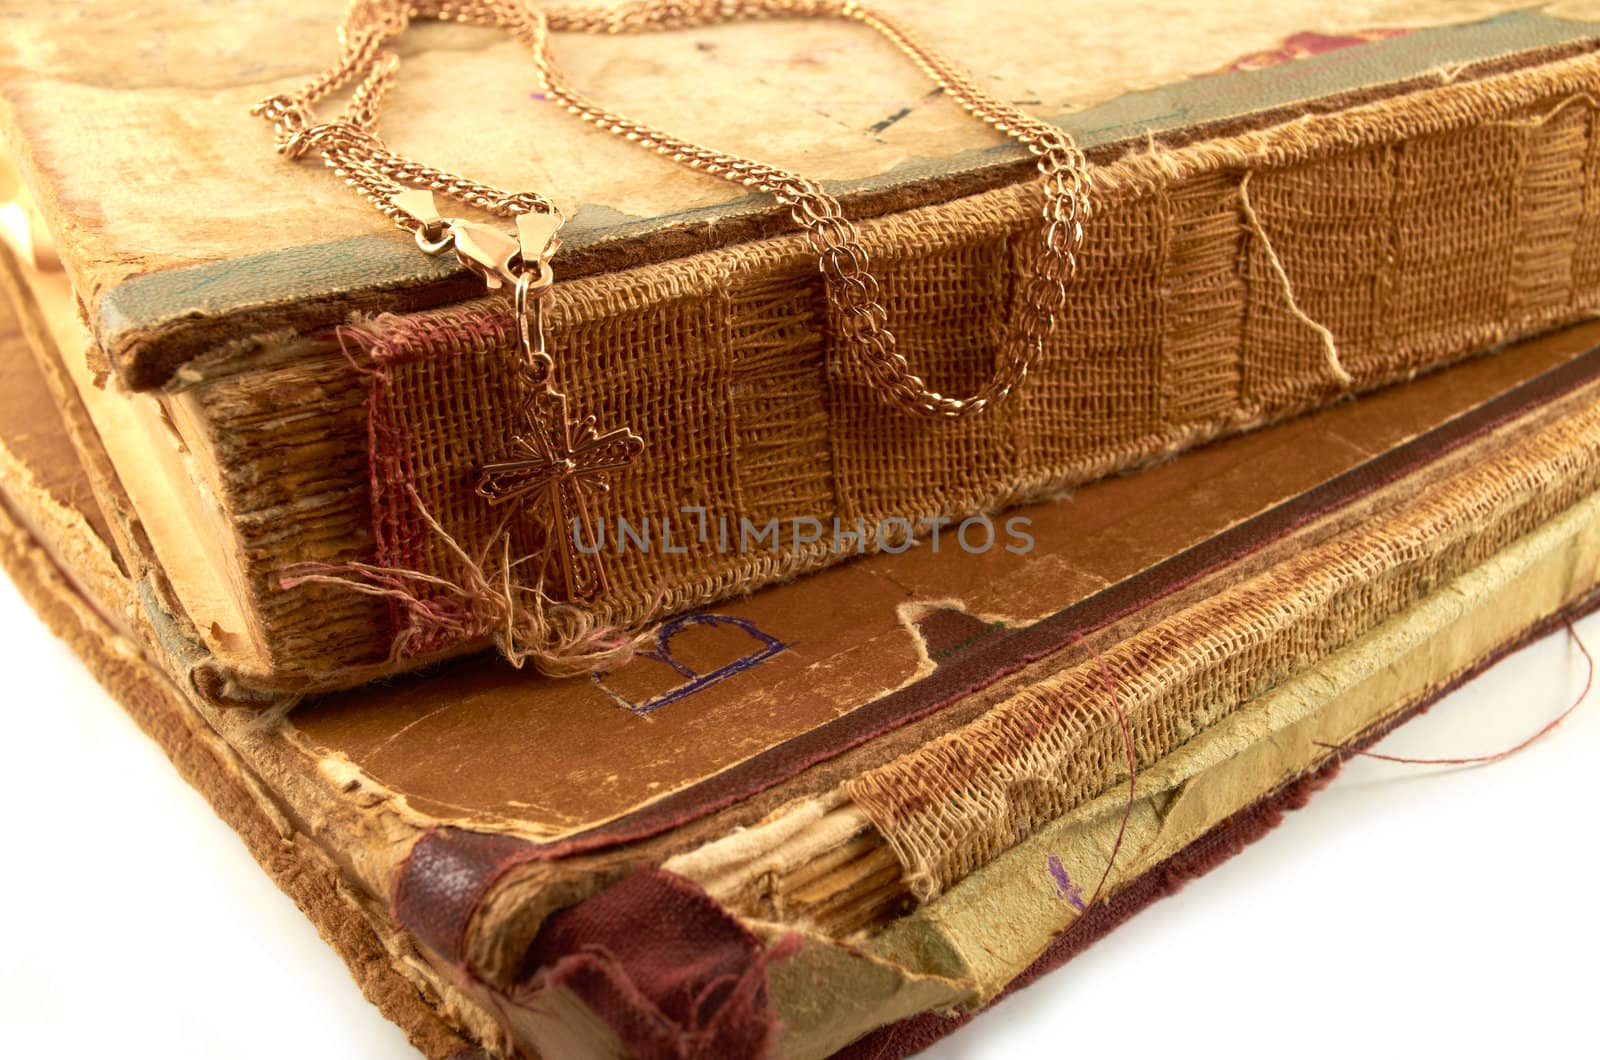 Ancient books by subos